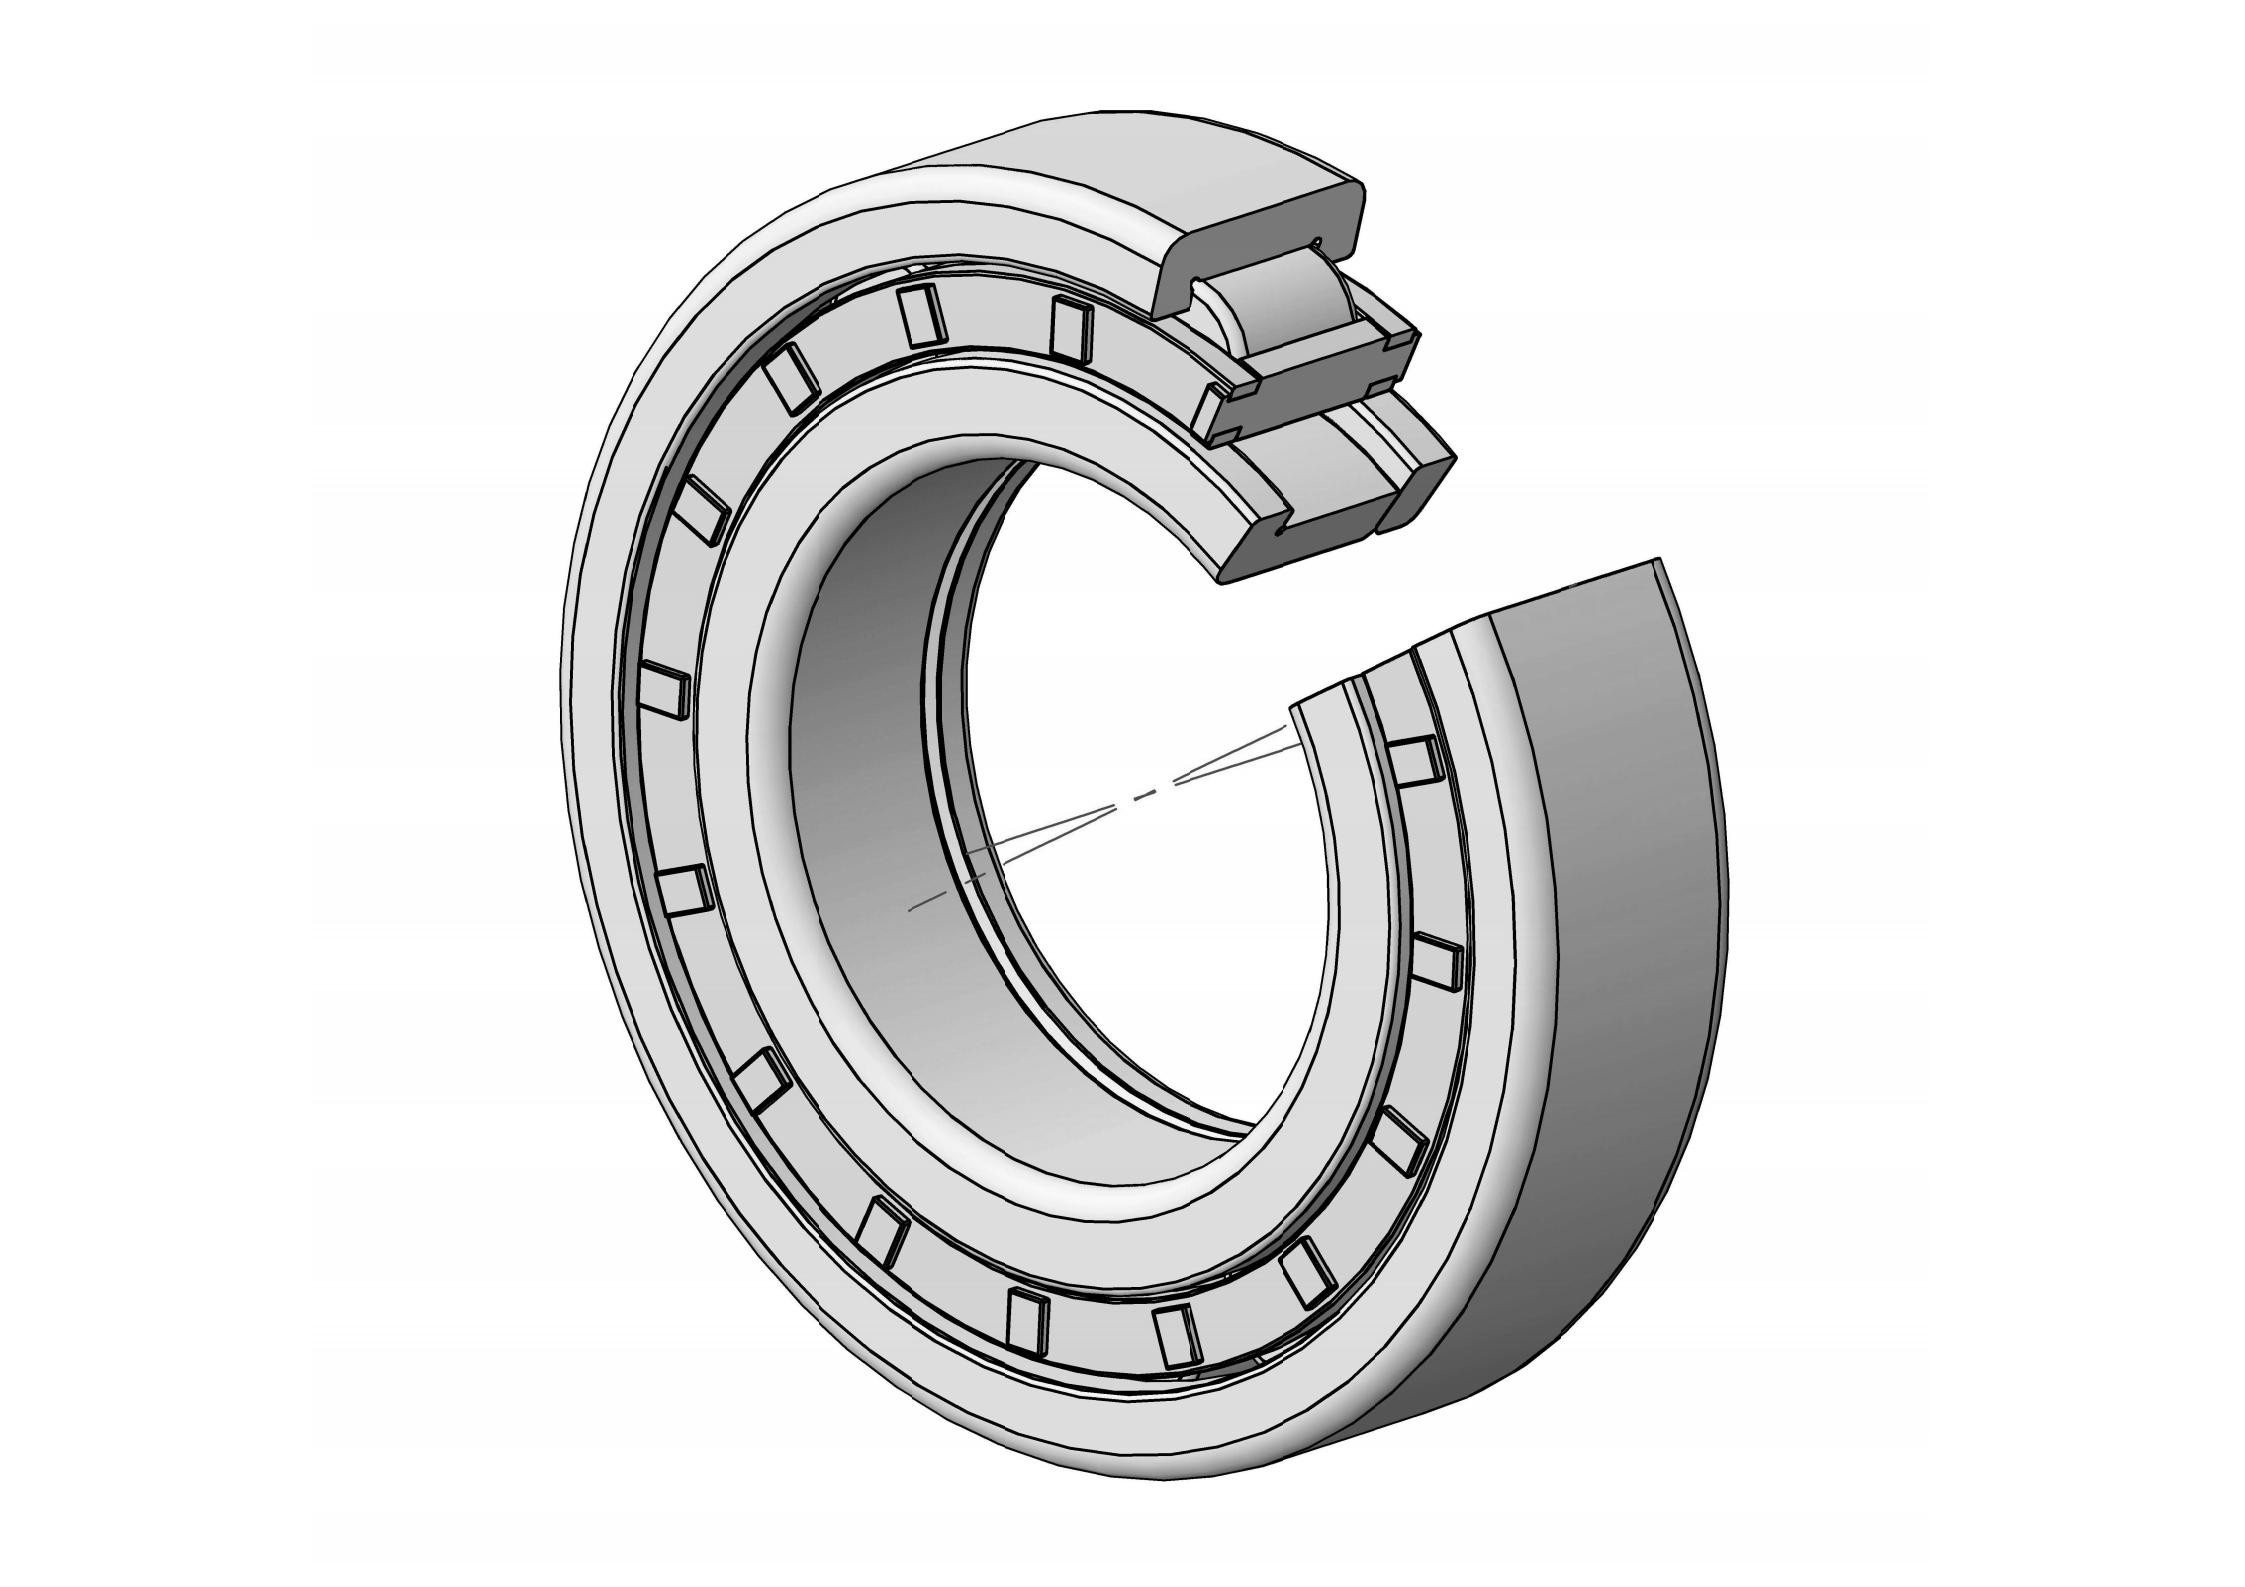 NUP2215-EM Single Row Cylindrical roller bearing 